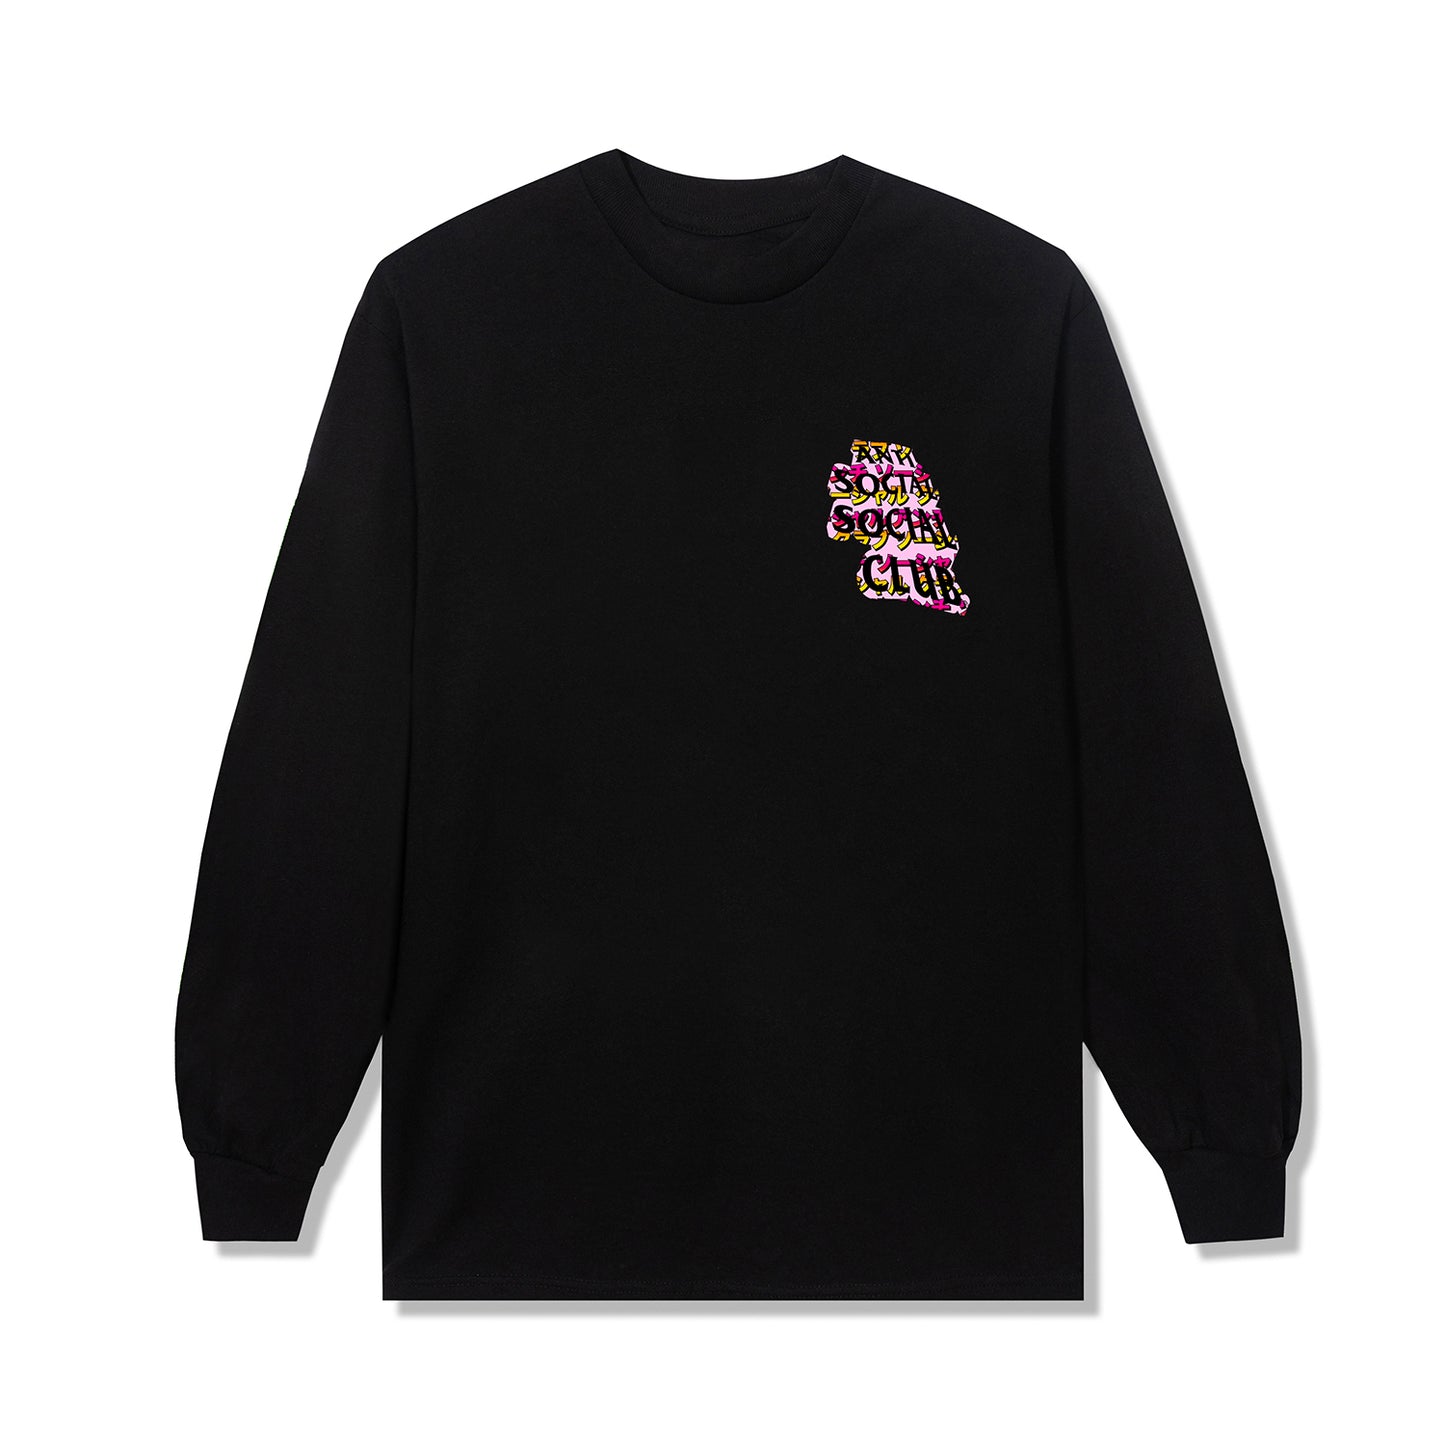 Twisted Quickness Long Sleeve Tee - Black